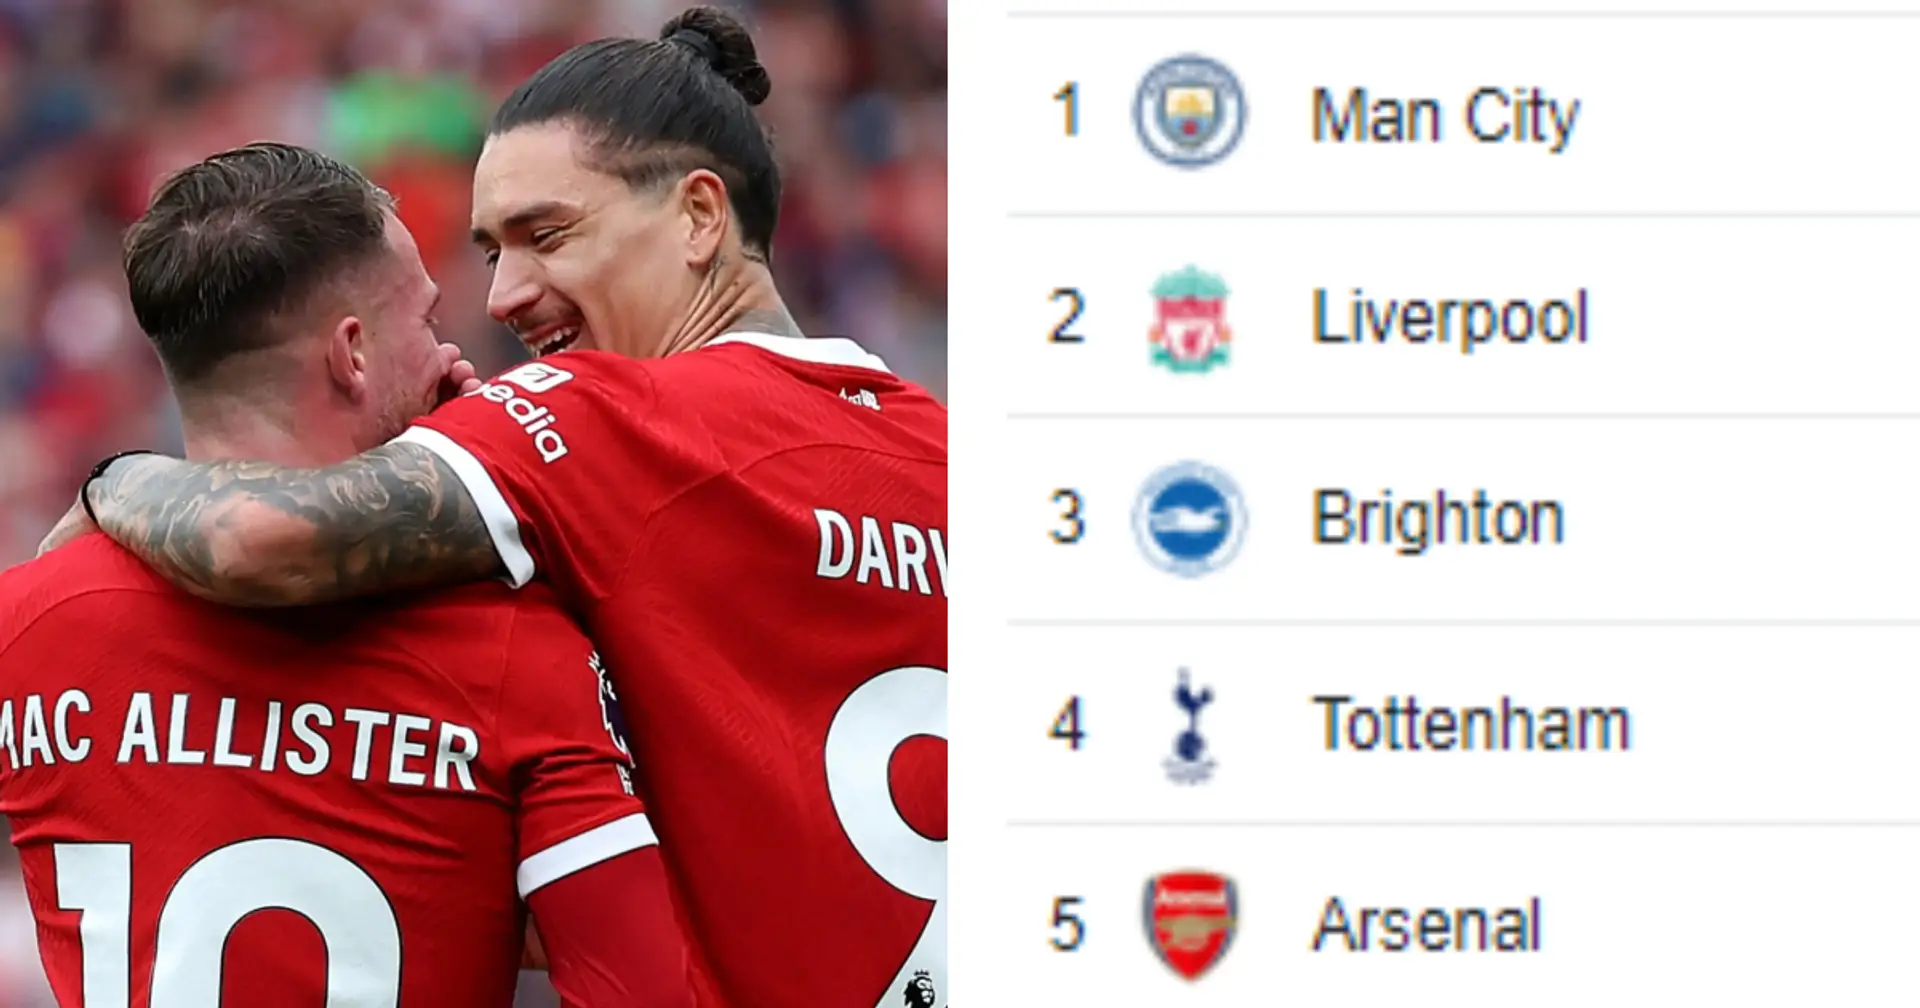 Keeping up with Man City: updated Premier League standings after matchday 6